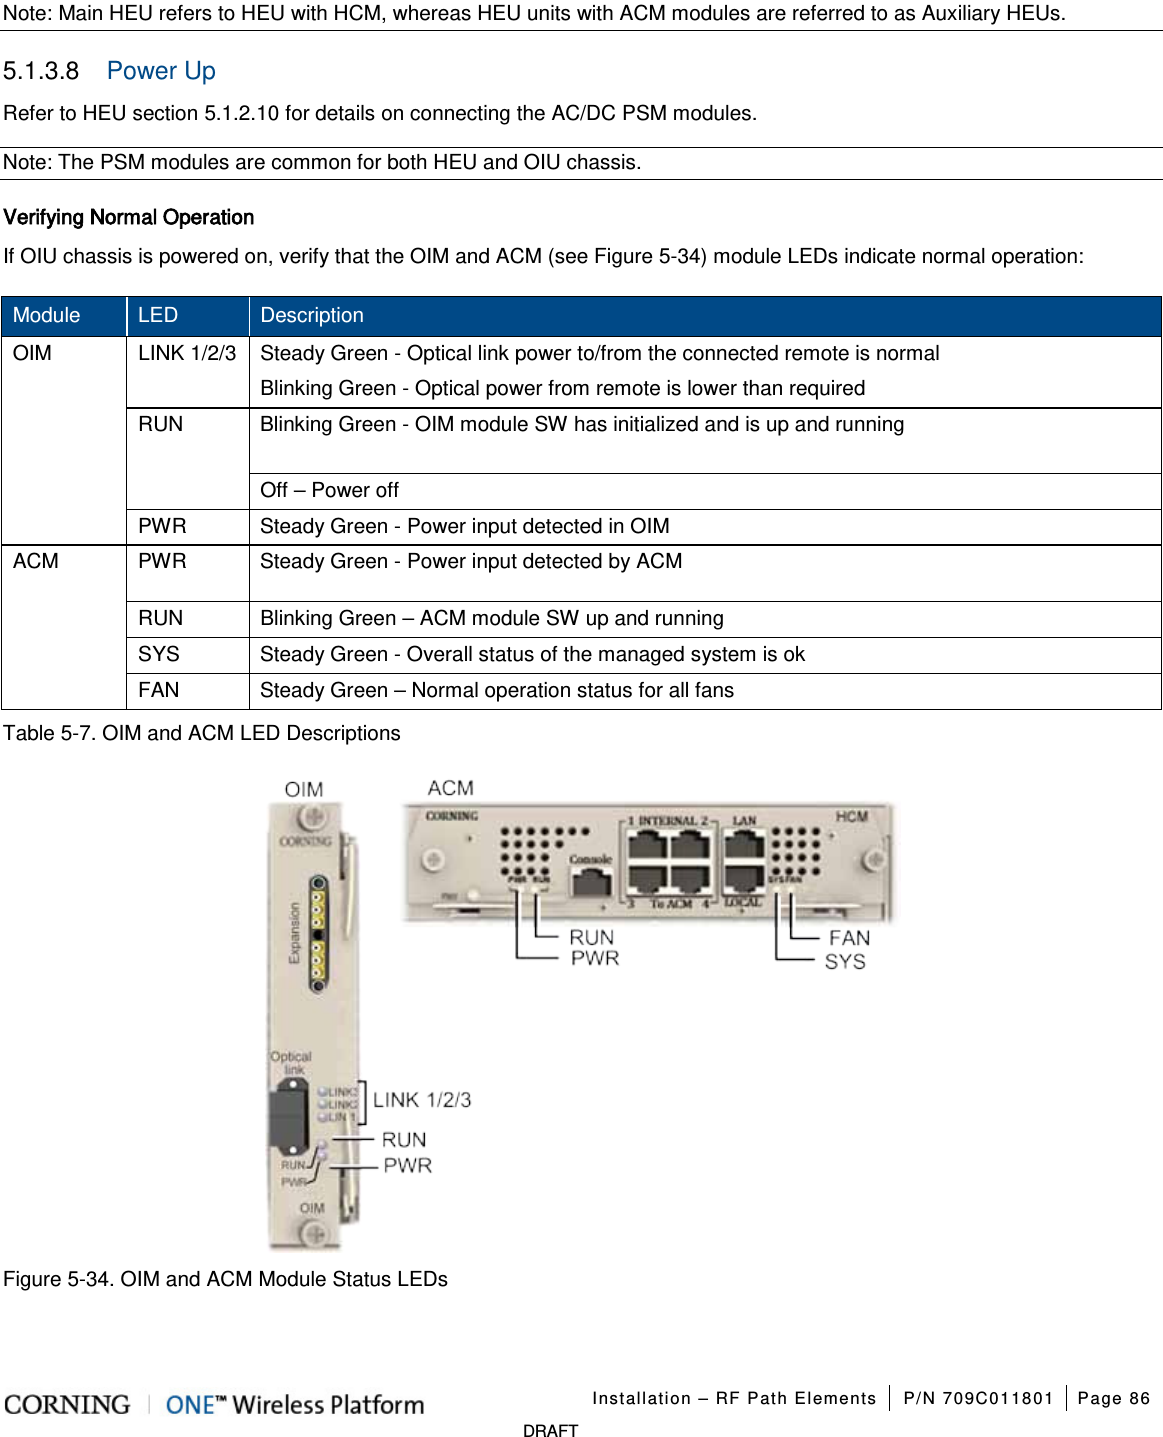   Installation – RF Path Elements P/N 709C011801 Page 86   DRAFT Note: Main HEU refers to HEU with HCM, whereas HEU units with ACM modules are referred to as Auxiliary HEUs. 5.1.3.8  Power Up   Refer to HEU section  5.1.2.10 for details on connecting the AC/DC PSM modules. Note: The PSM modules are common for both HEU and OIU chassis. Verifying Normal Operation   If OIU chassis is powered on, verify that the OIM and ACM (see Figure  5-34) module LEDs indicate normal operation: Module LED Description OIM LINK 1/2/3 Steady Green - Optical link power to/from the connected remote is normal   Blinking Green - Optical power from remote is lower than required RUN   Blinking Green - OIM module SW has initialized and is up and running Off – Power off PWR Steady Green - Power input detected in OIM ACM PWR Steady Green - Power input detected by ACM RUN Blinking Green – ACM module SW up and running SYS Steady Green - Overall status of the managed system is ok FAN Steady Green – Normal operation status for all fans Table  5-7. OIM and ACM LED Descriptions  Figure  5-34. OIM and ACM Module Status LEDs    